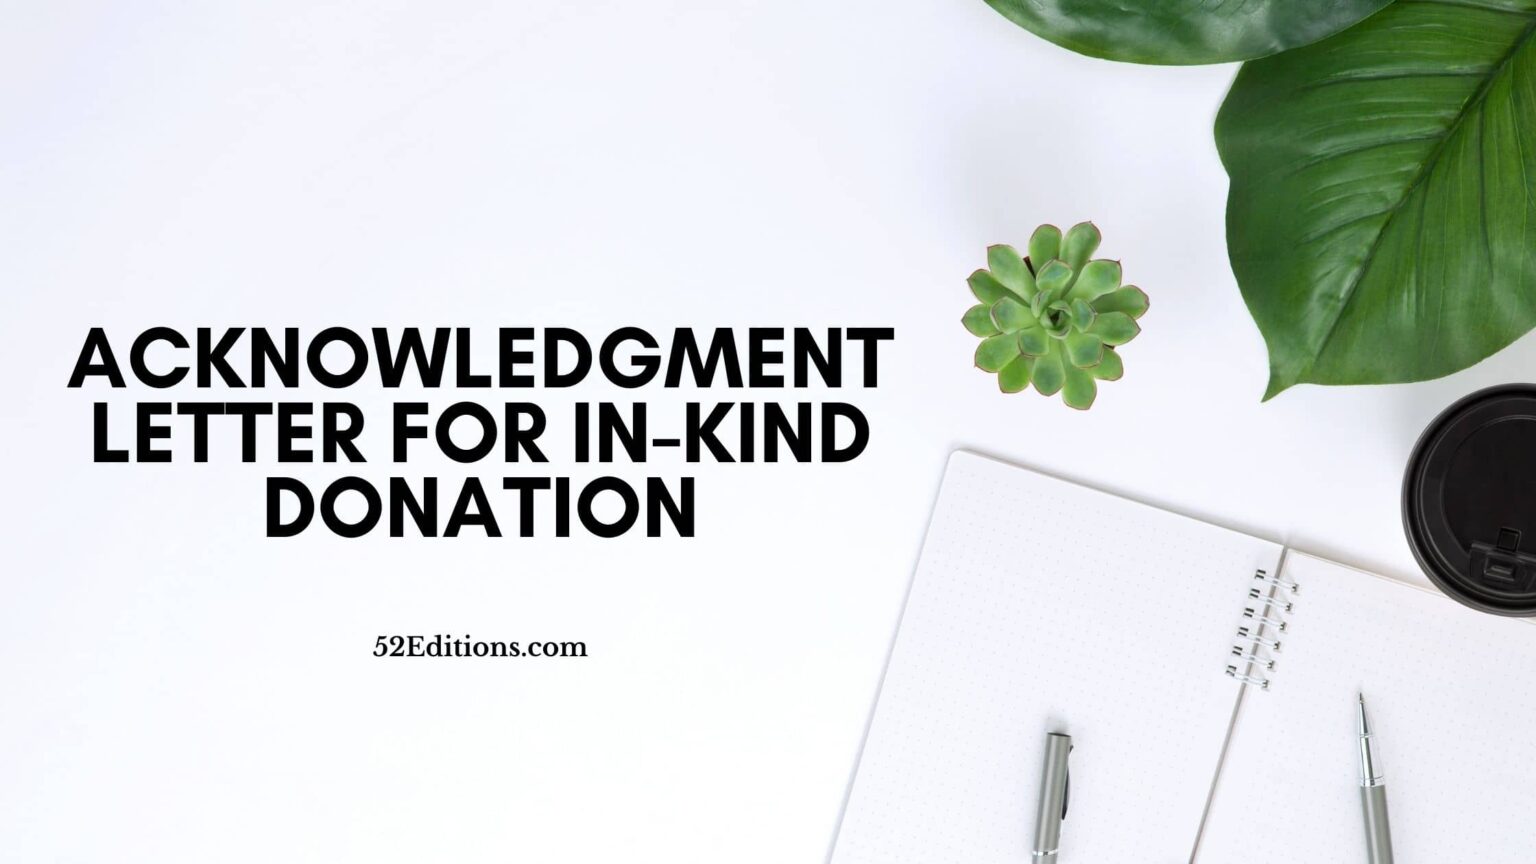 Acknowledgment Letter For InKind Donation // Get FREE Letter Templates